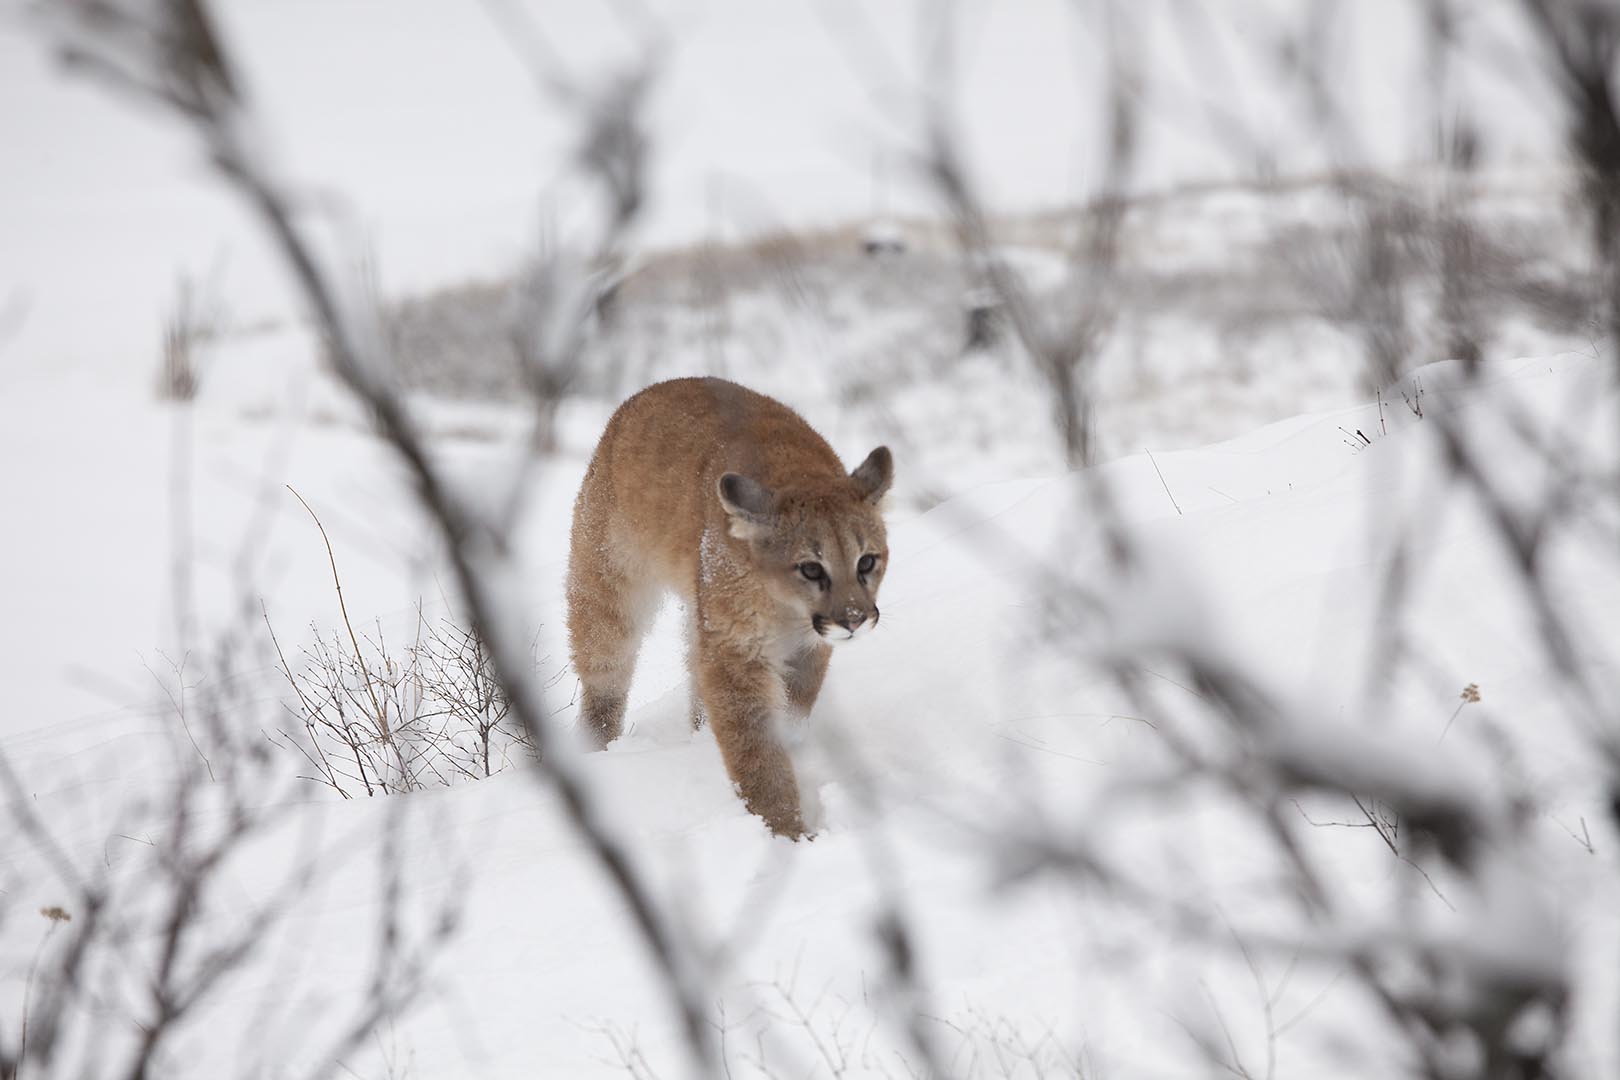 image of mountain lion stalking through the snow - focused through foreground branches